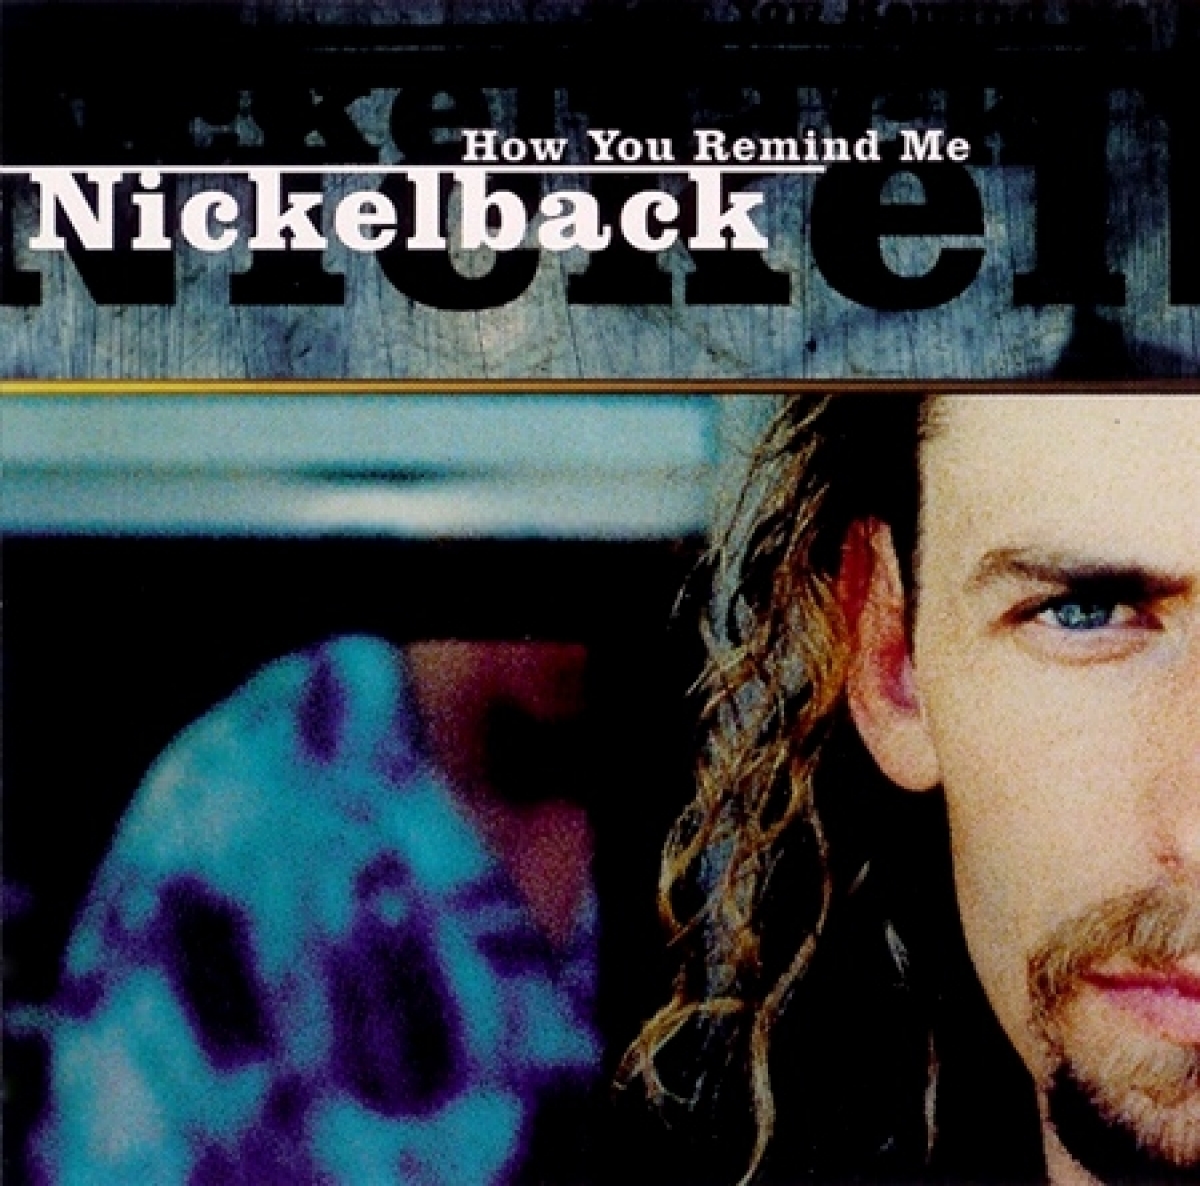 NICKELBACK - How You Remind Me